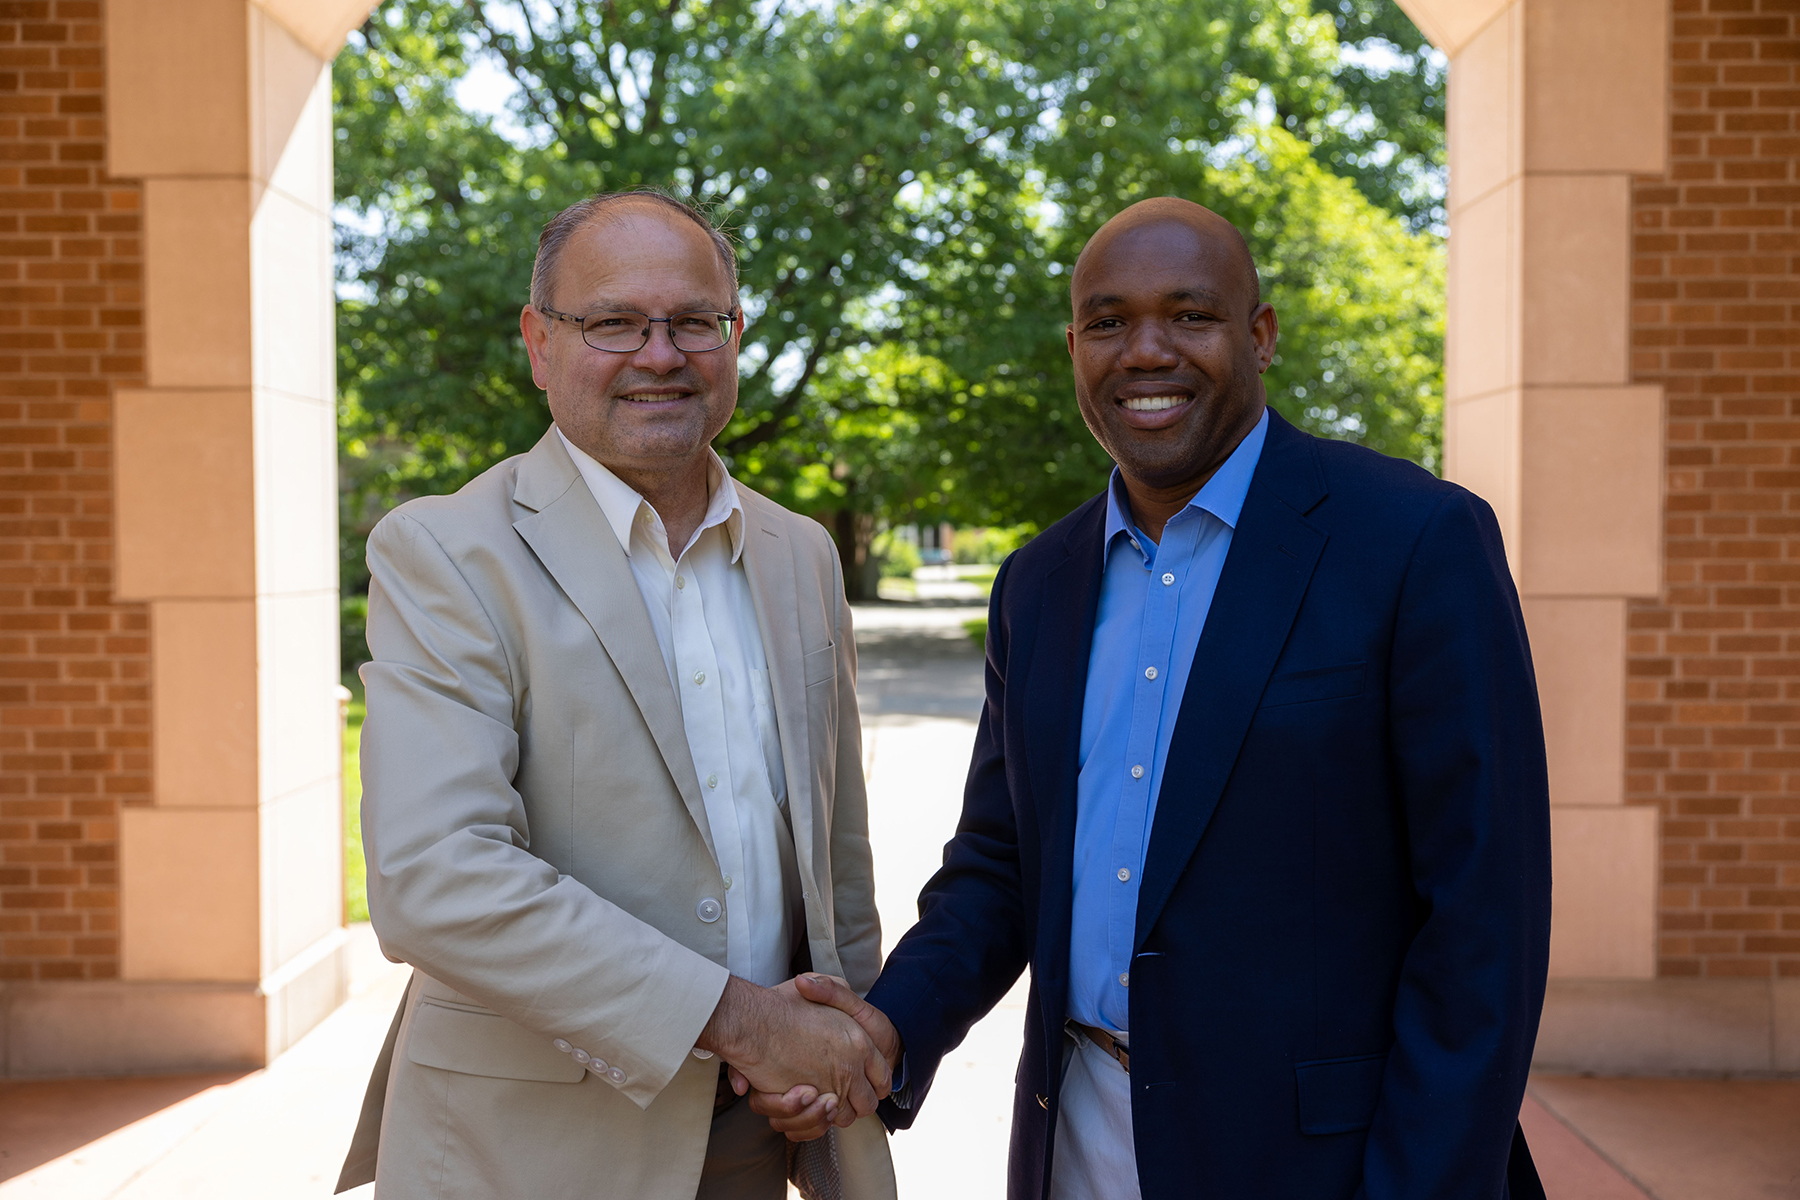 Two men of different ethnicities smiling and shaking hands.